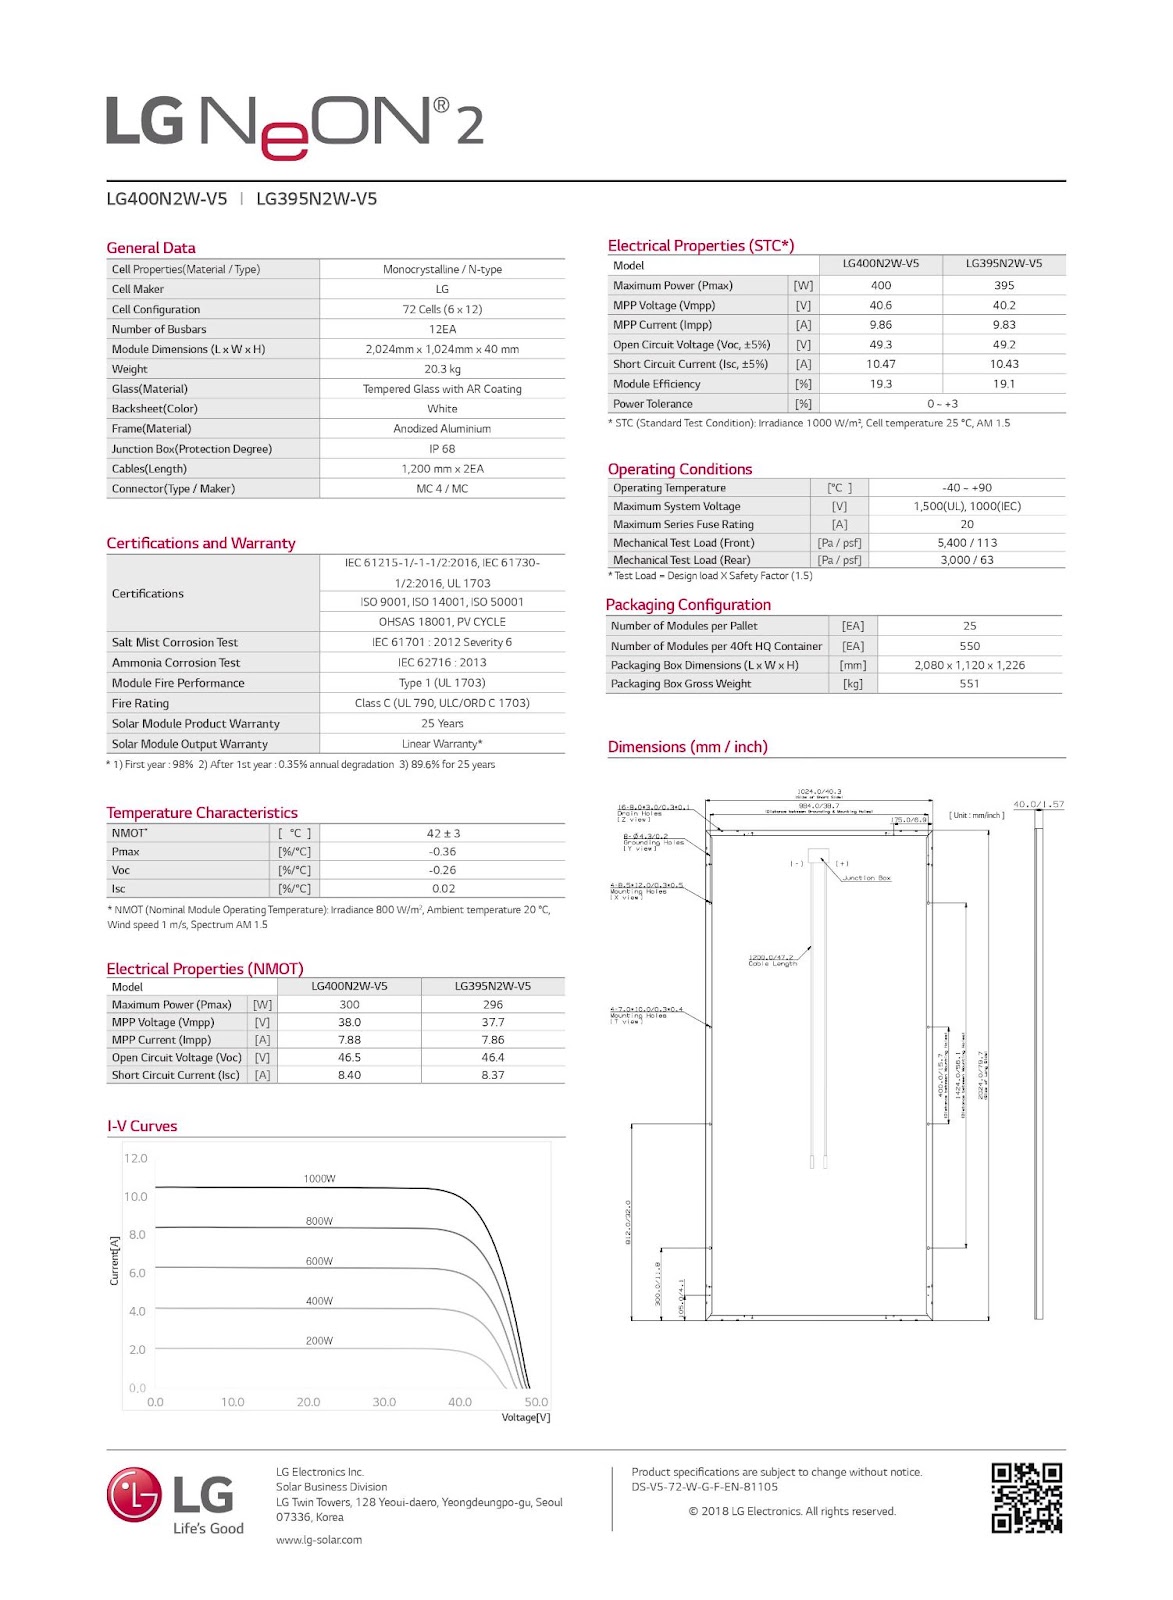 Technical specifications of a 400W solar panel.